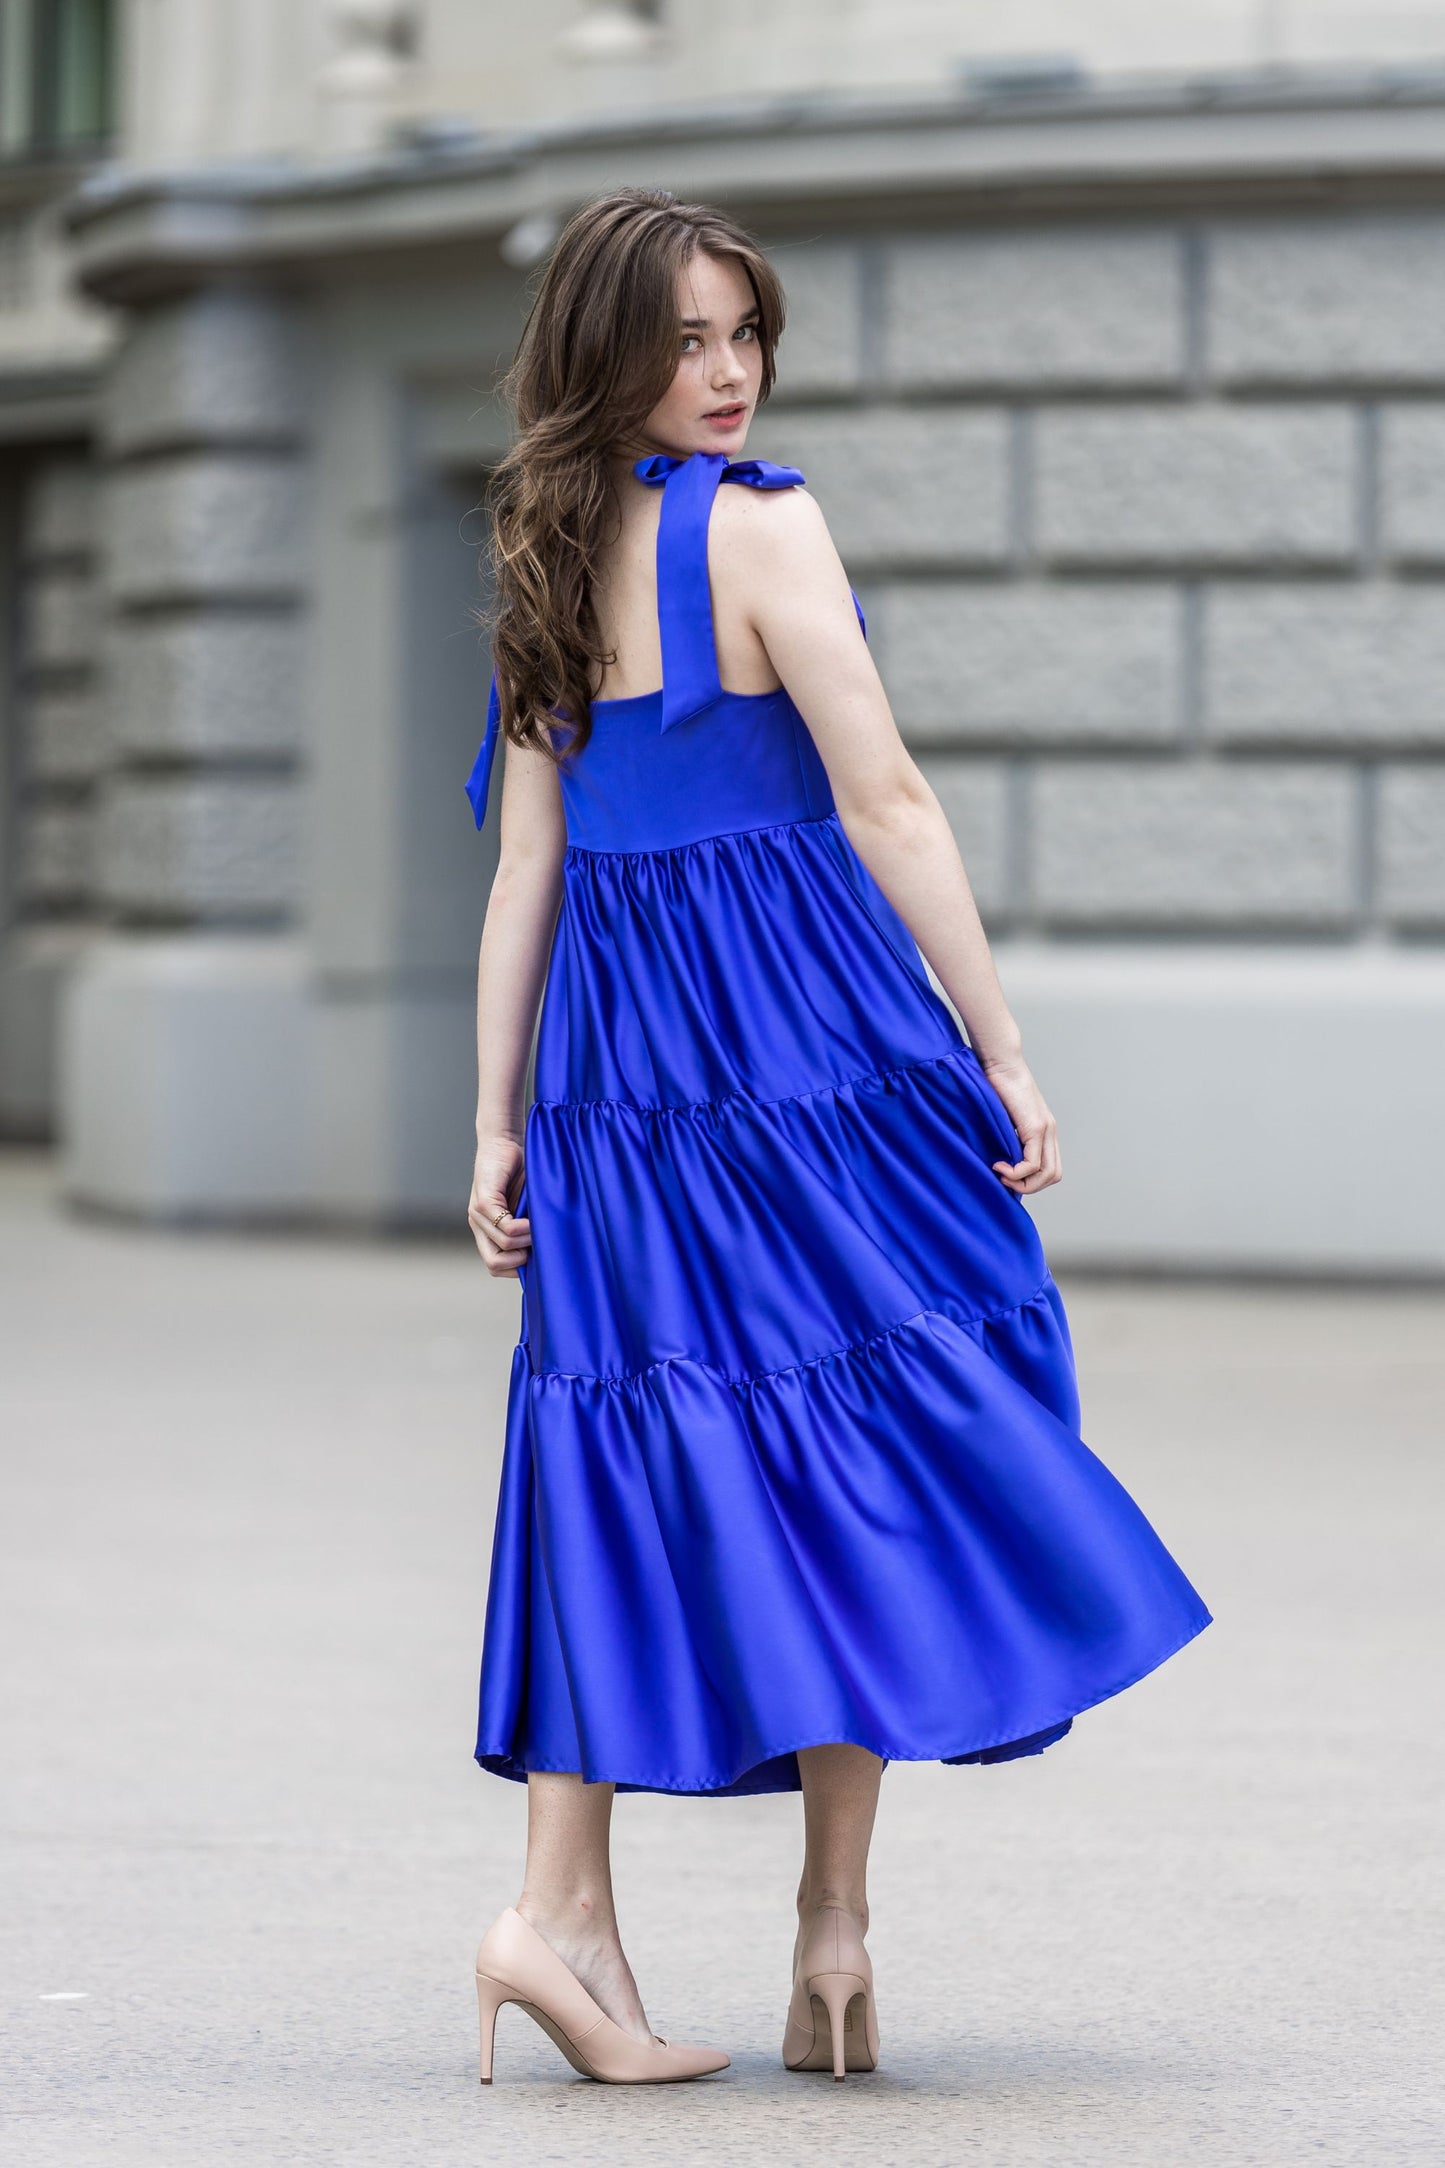 Satin dress with super bows on the shoulders.